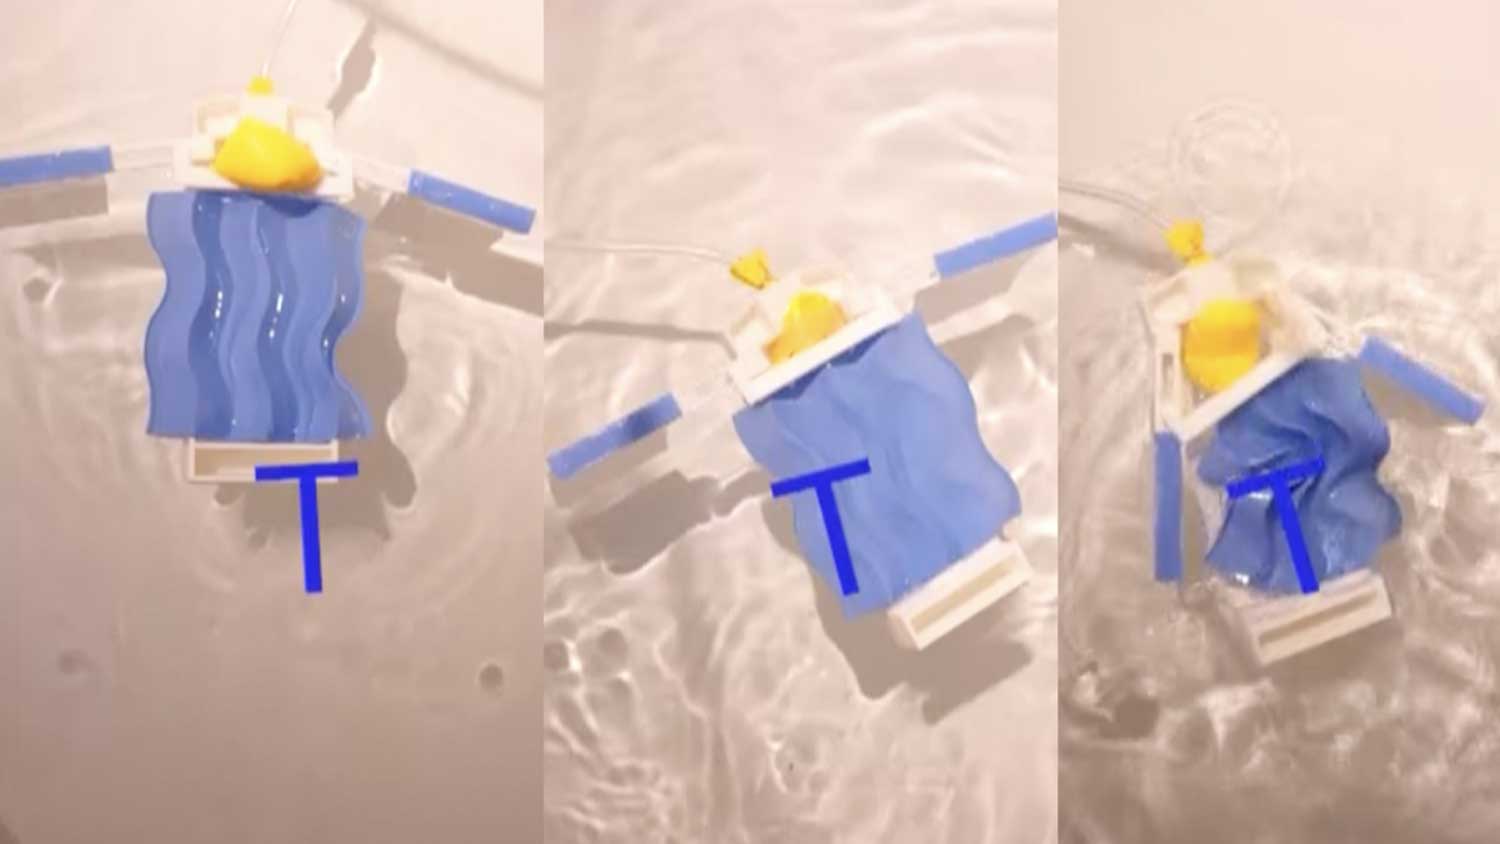 Screenshot of a simple swimming robot performing three different tasks based on different types of origami creases in the main body